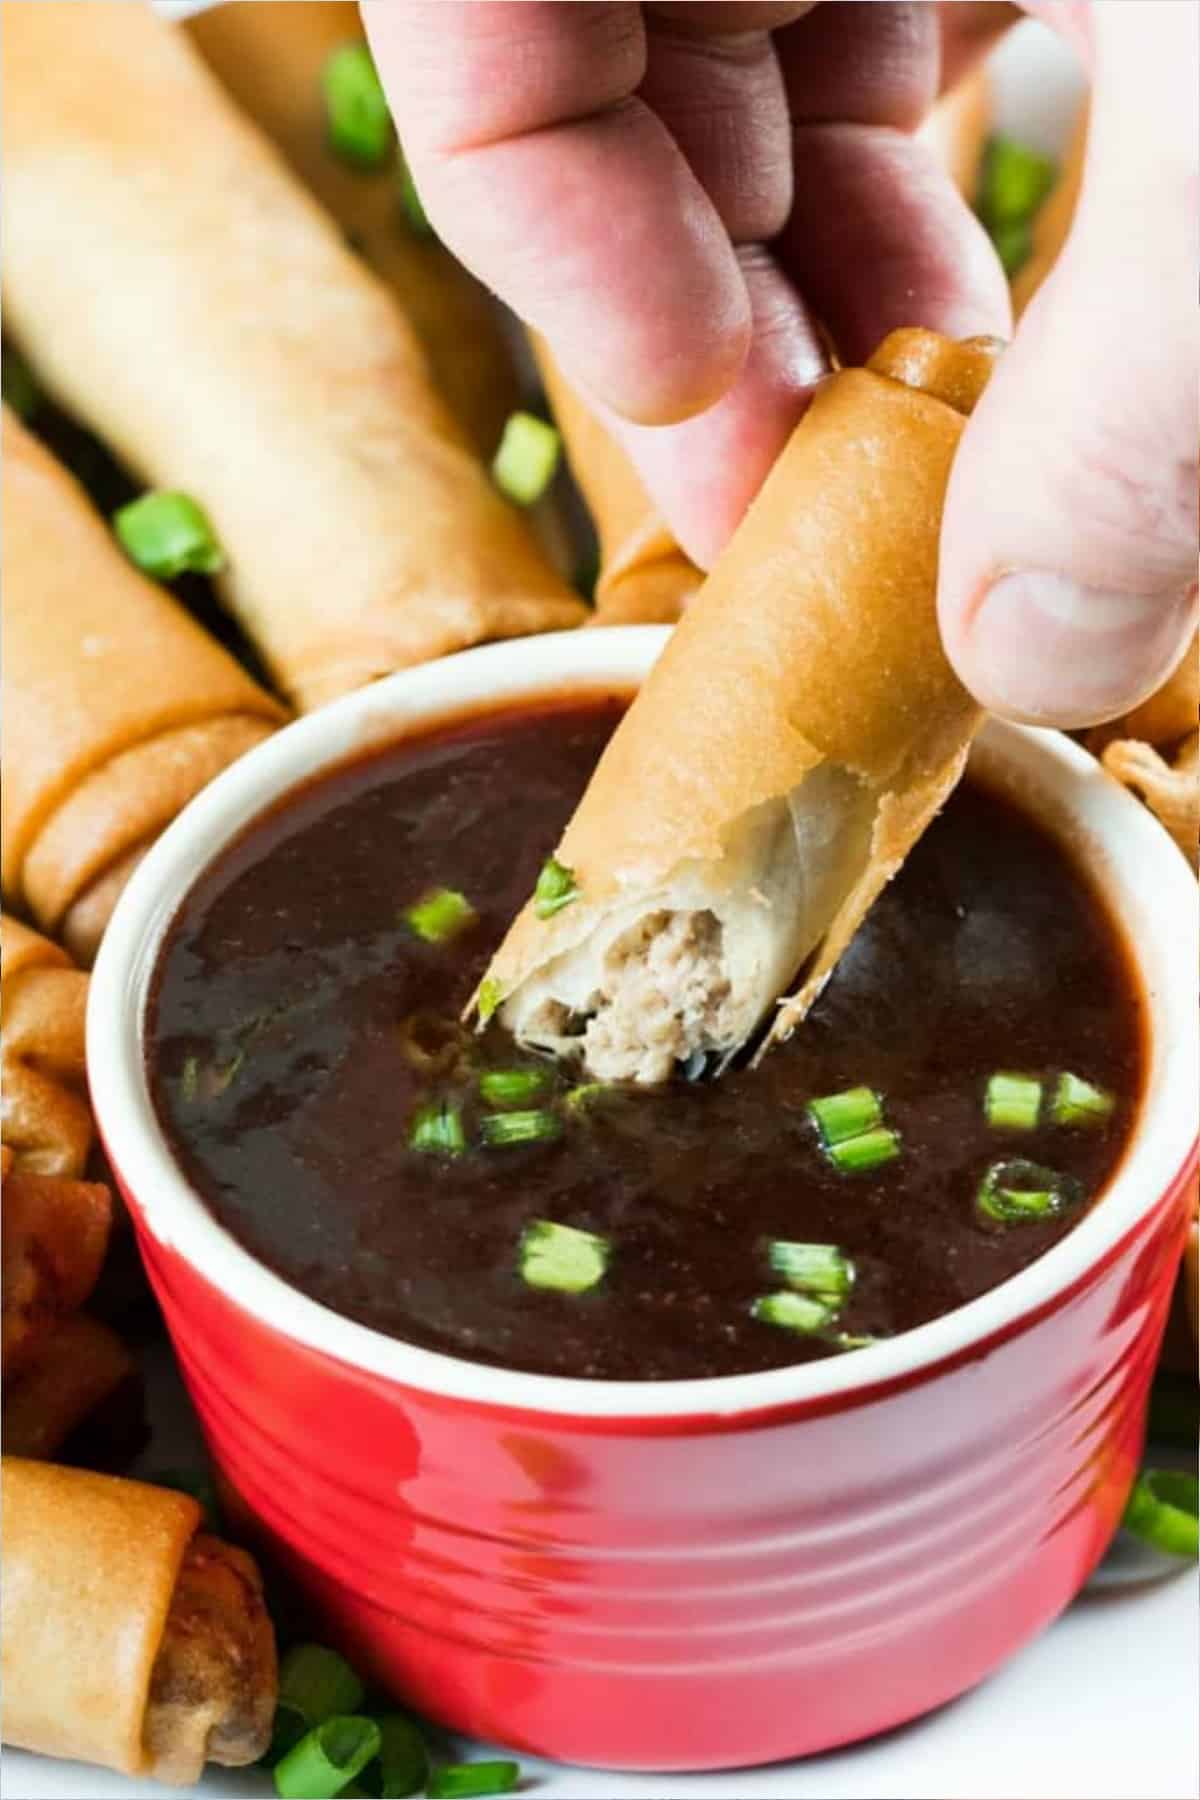 Turkey spring roll being dipped in cranberry dipping sauce